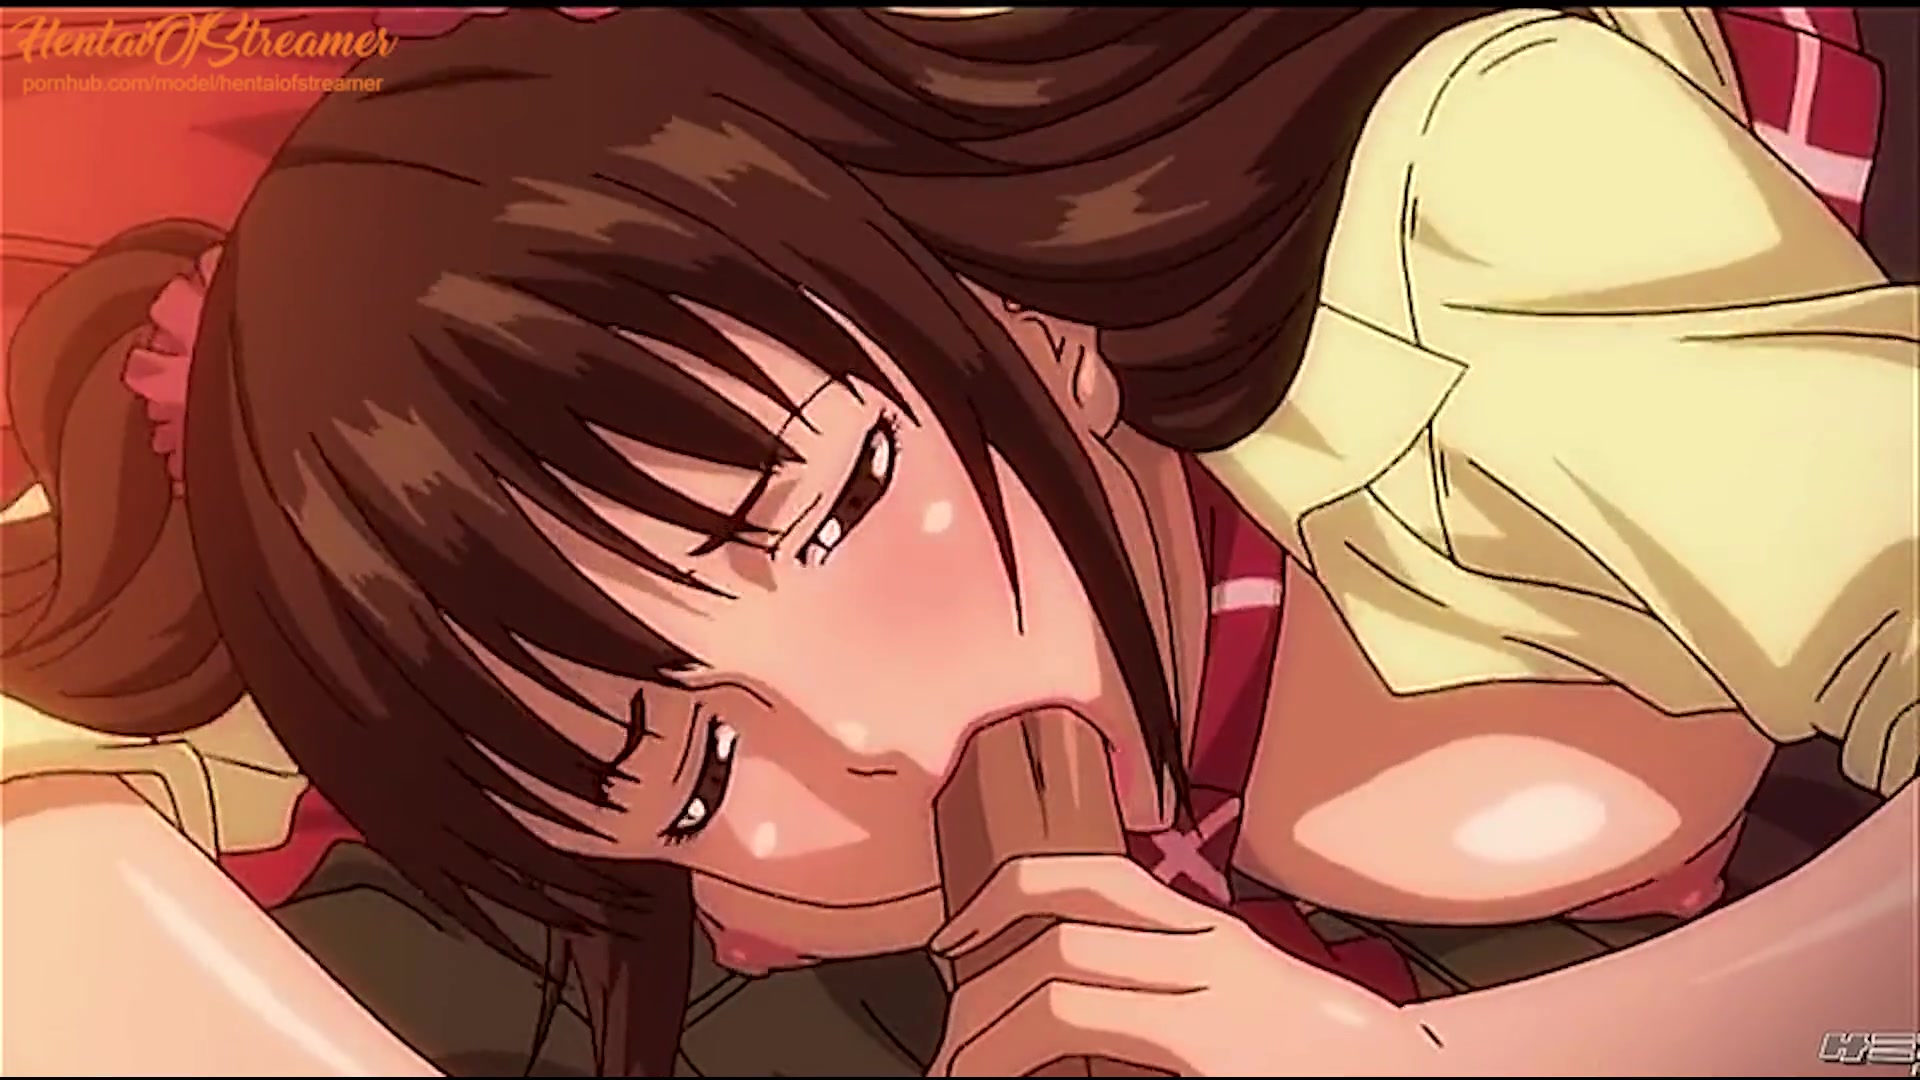 Red Anime Porn - Anime Porn Uncensored - Hotwife Dude Sees his Gf Plumb and Deep-Throat off  another Stud - Anime Porn, Anime - uiPorn.com